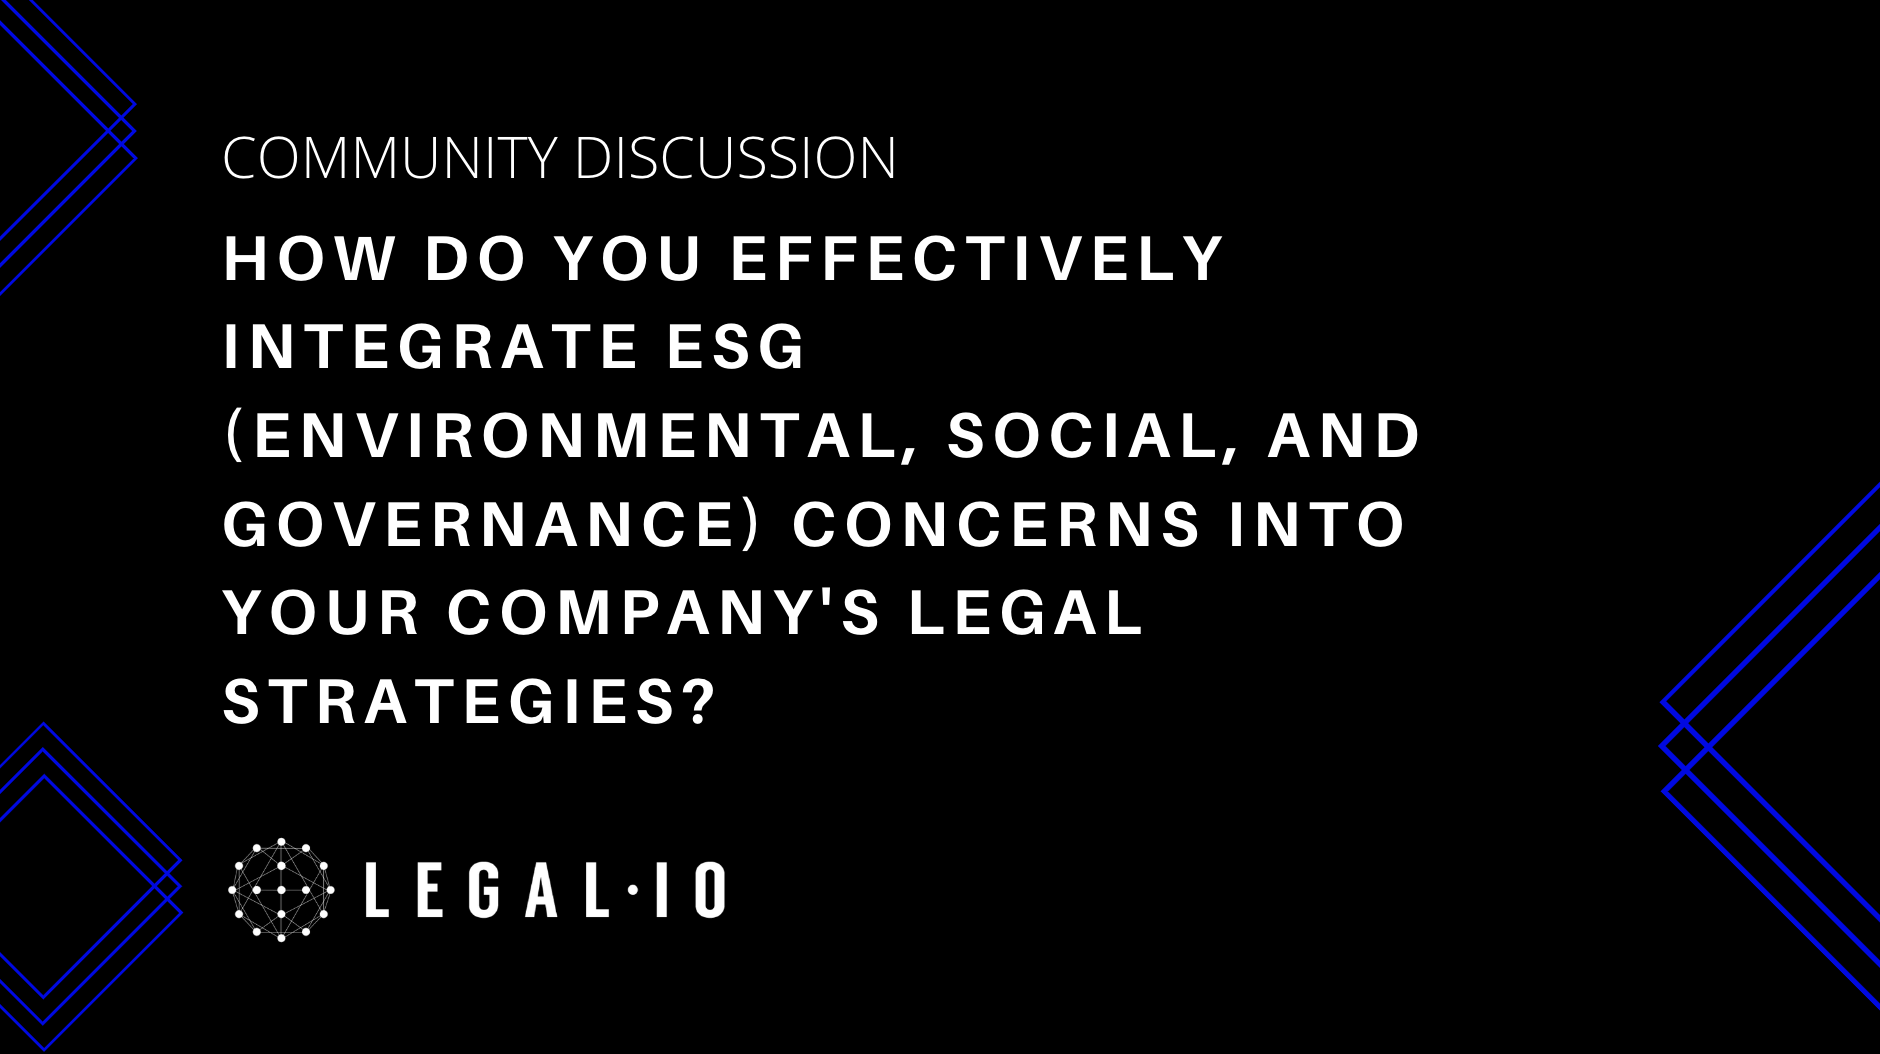 Community Discussion: How do you effectively integrate ESG (Environmental, Social, and Governance) concerns into your company's legal strategies?